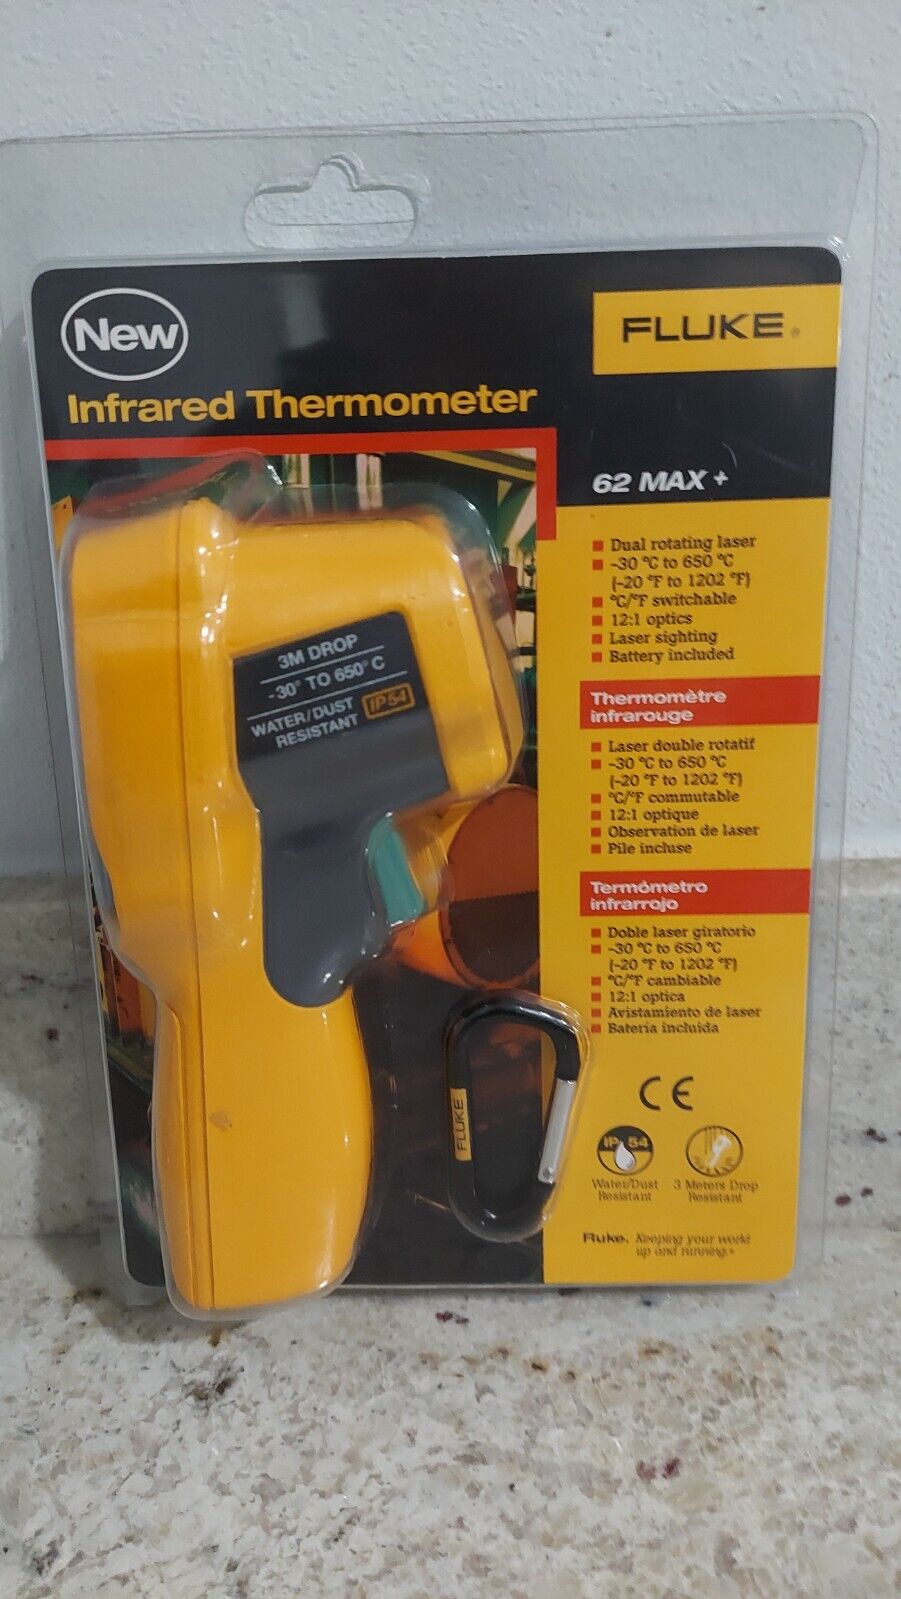 Fluke 62 Max+ Thermometer (Not for human temp), -20 to +1202 Degree F Range